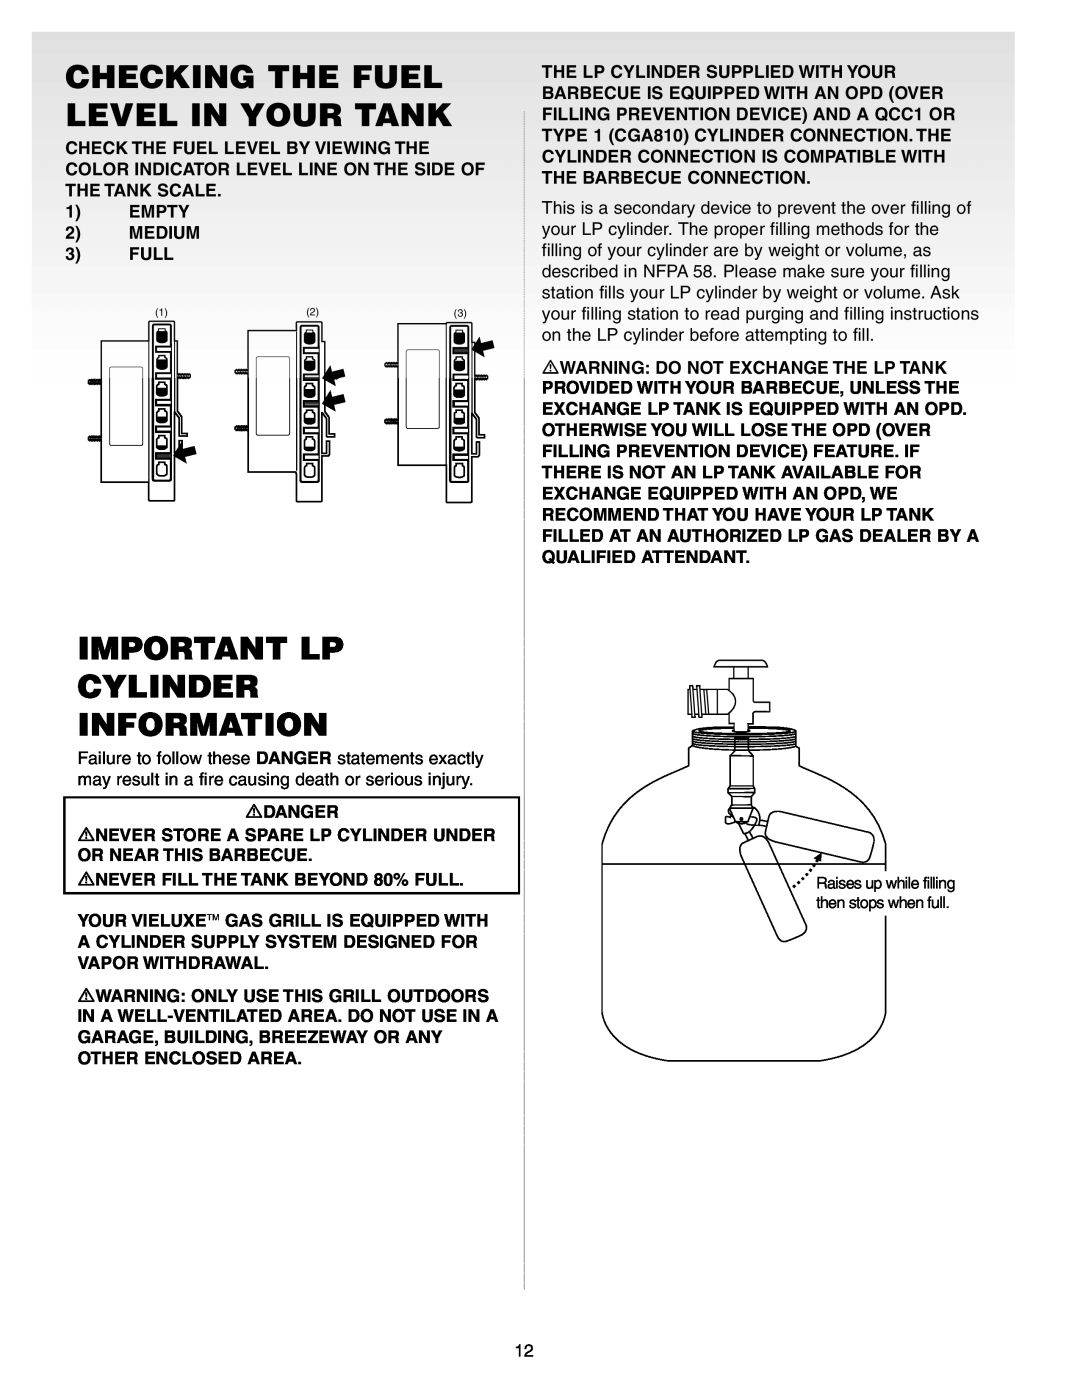 Weber Gas Burner manual Checking The Fuel Level In Your Tank, Important Lp Cylinder Information 